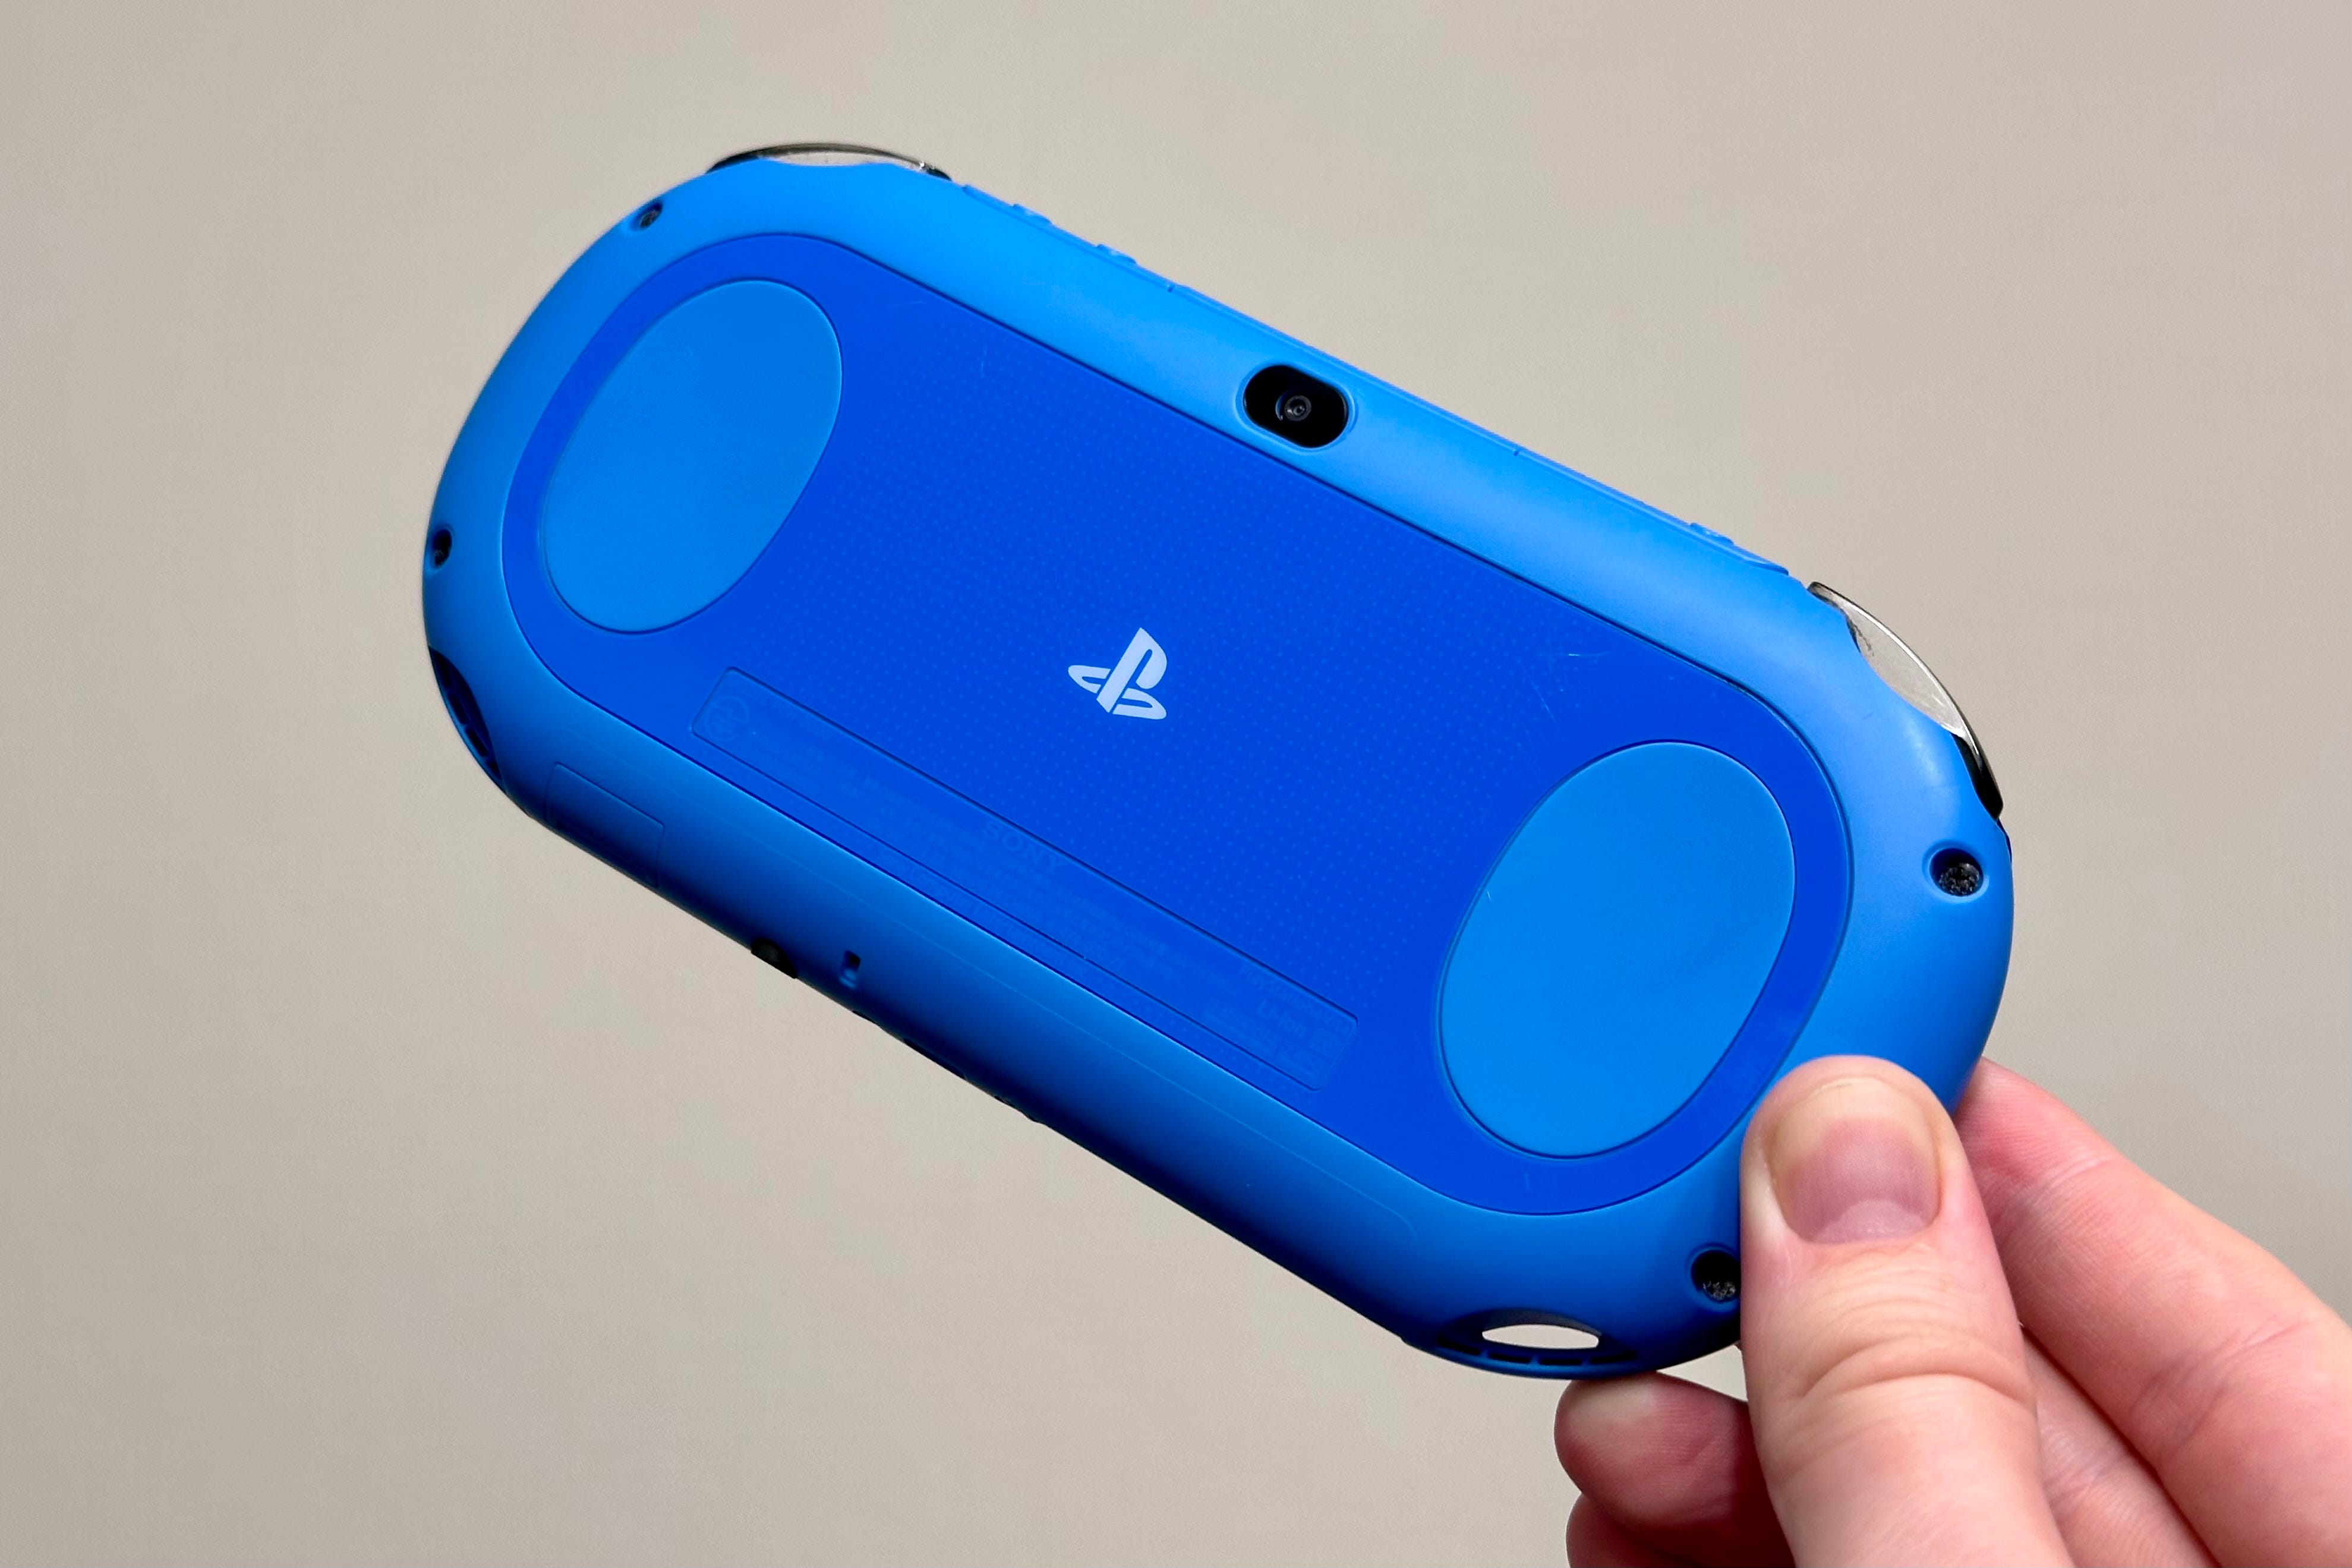 Sony Confirms Its Game Streaming Handheld, Which Is Just a PS5 Controller  With a Screen